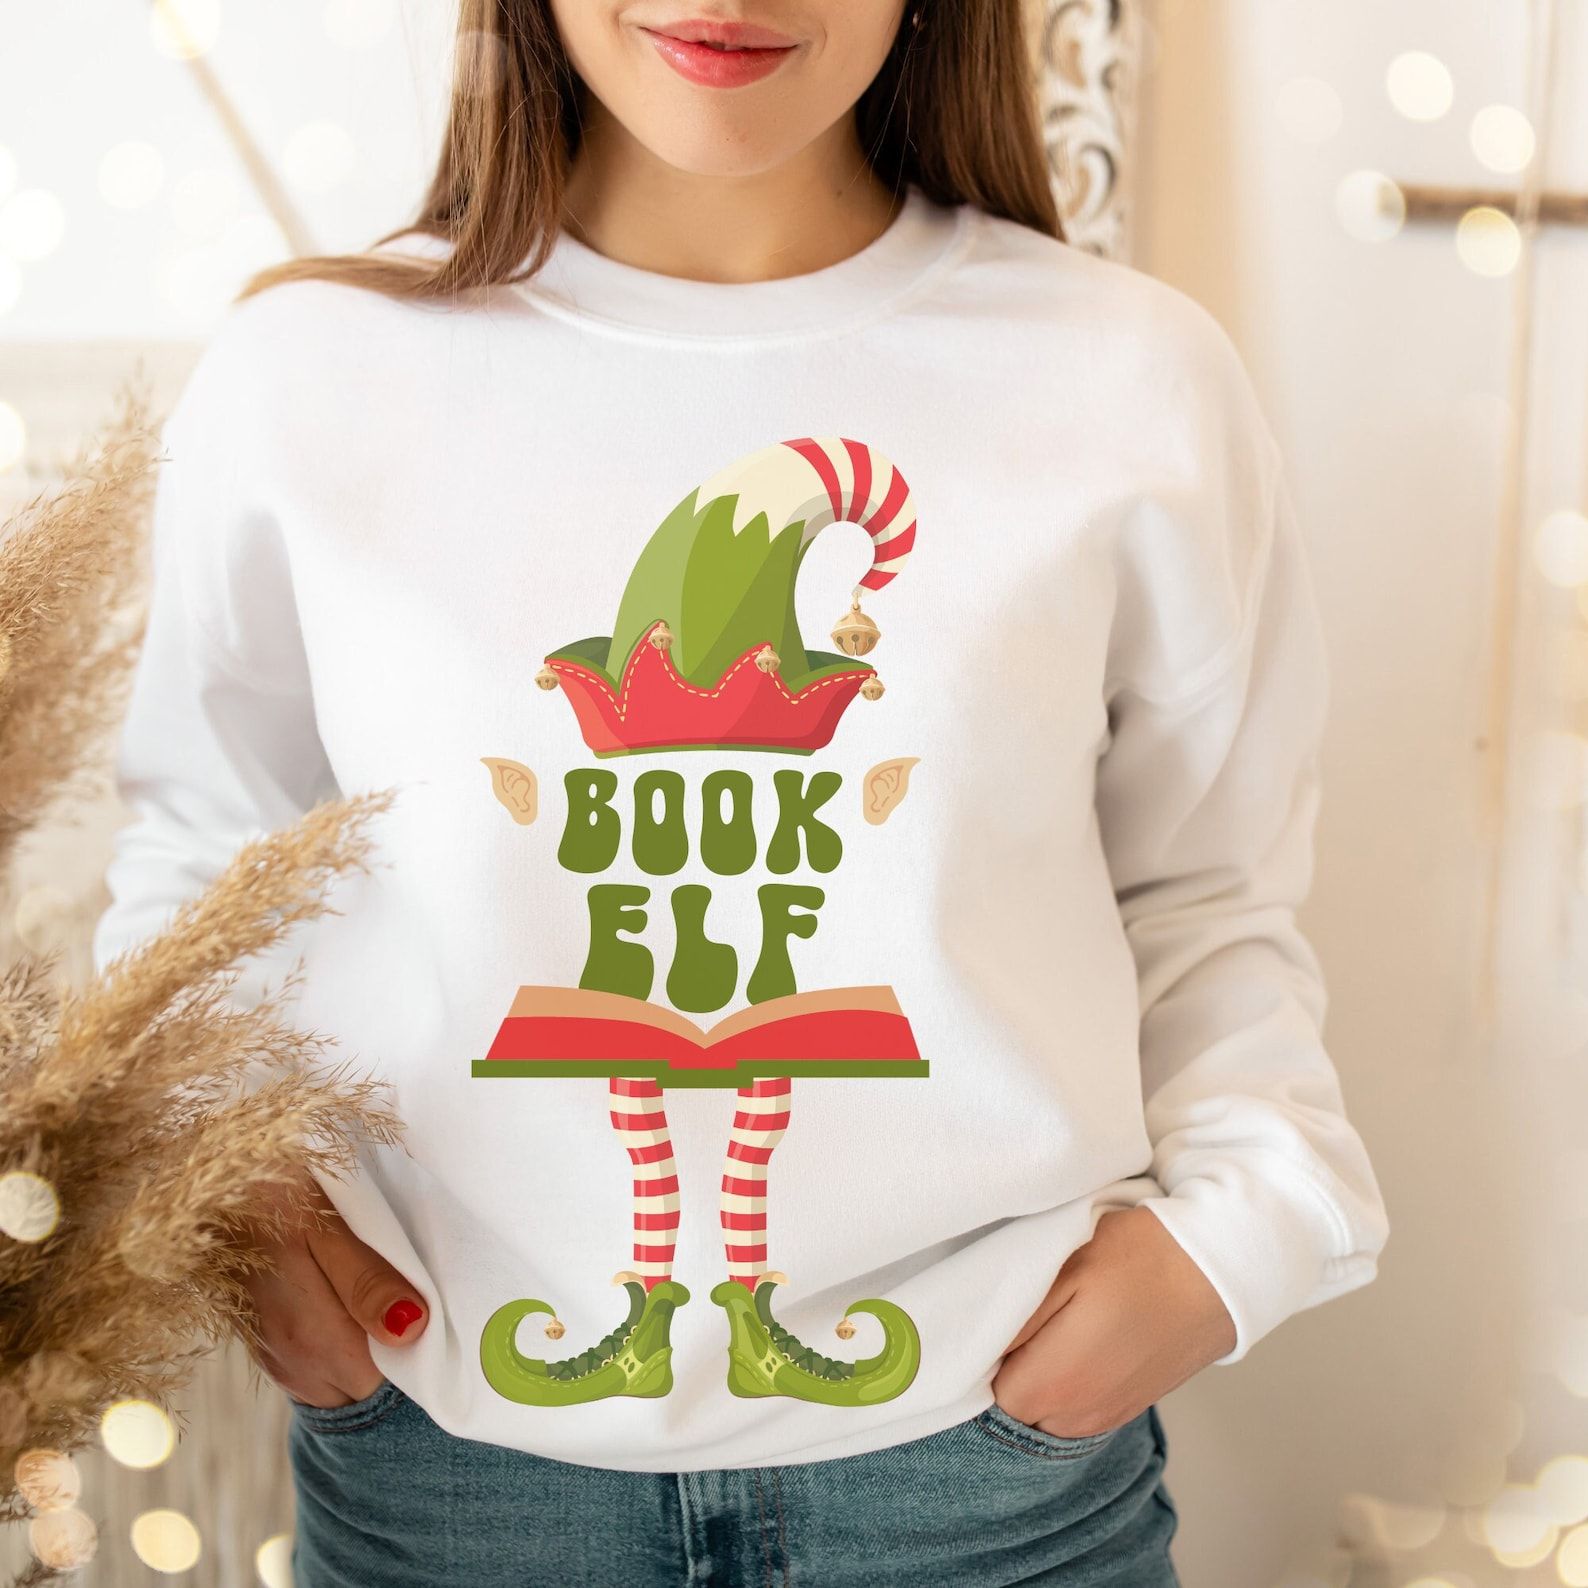 A white sweatshirt with elf legs and hat that reads "book elf"